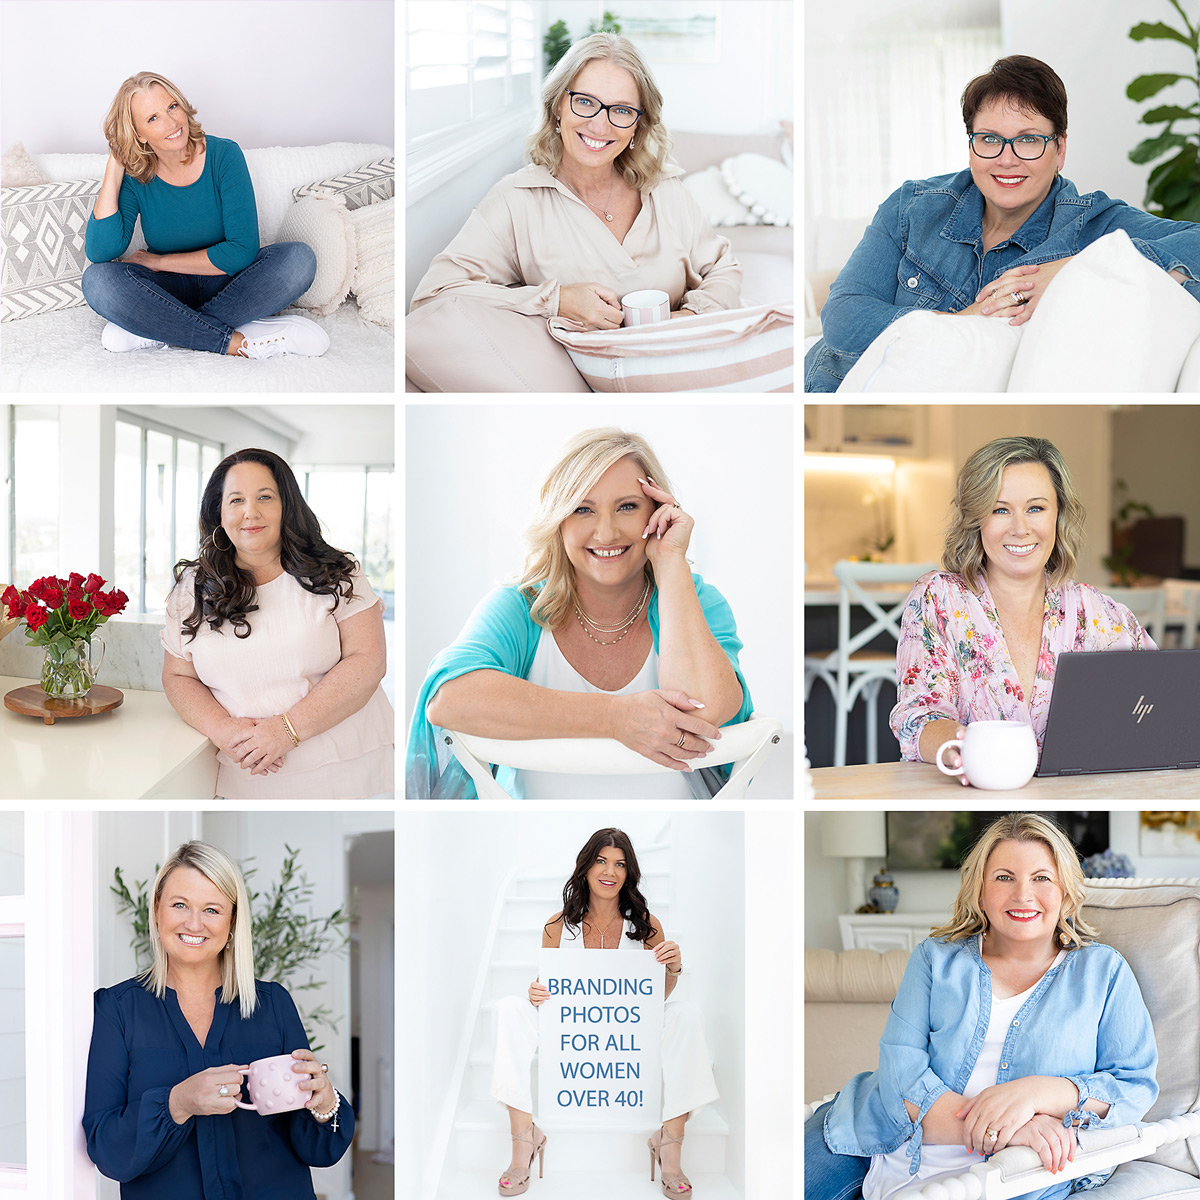 Profile photos for older business women